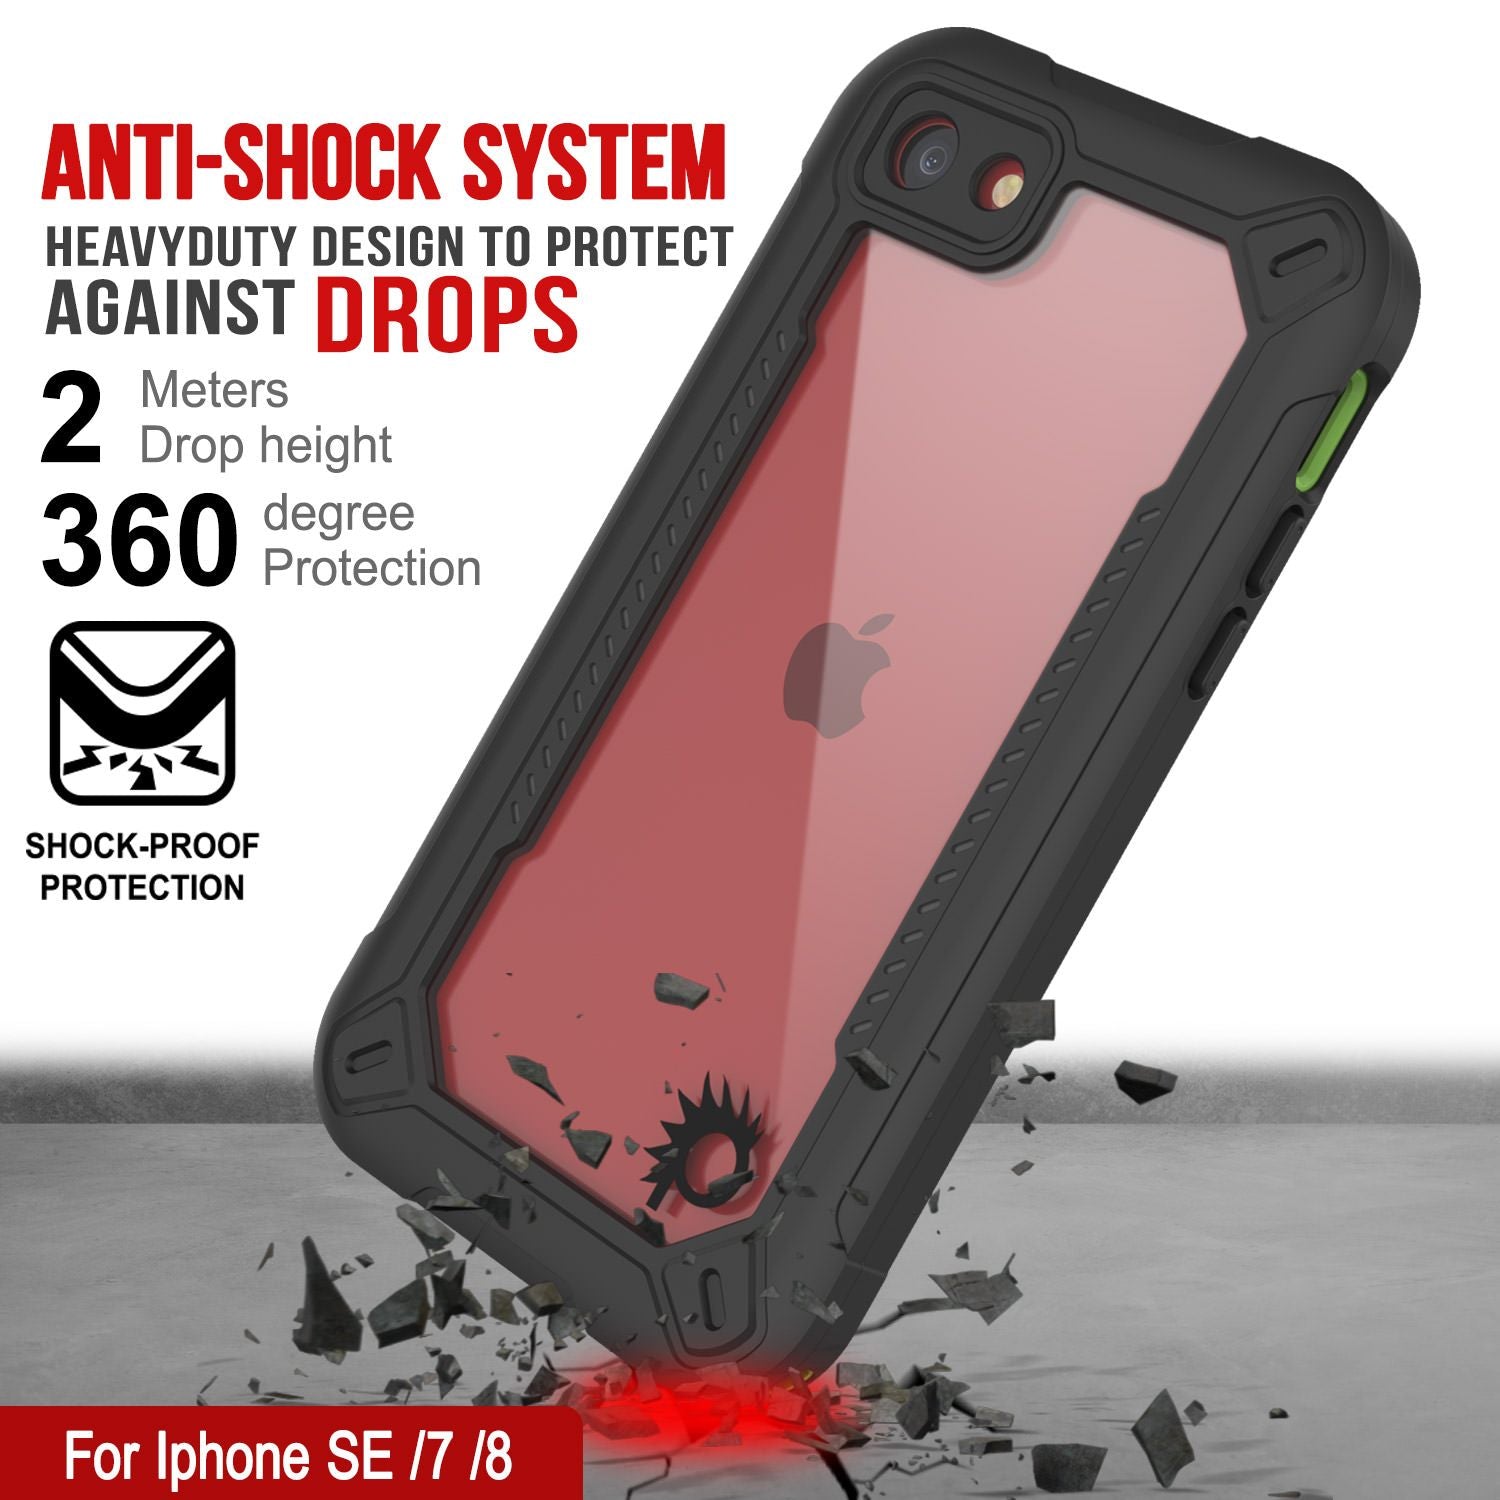 iPhone 7 Waterproof IP68 Case, Punkcase [Green]  [Maximus Series] [Slim Fit] [IP68 Certified] [Shockresistant] Clear Armor Cover with Screen Protector | Ultimate Protection